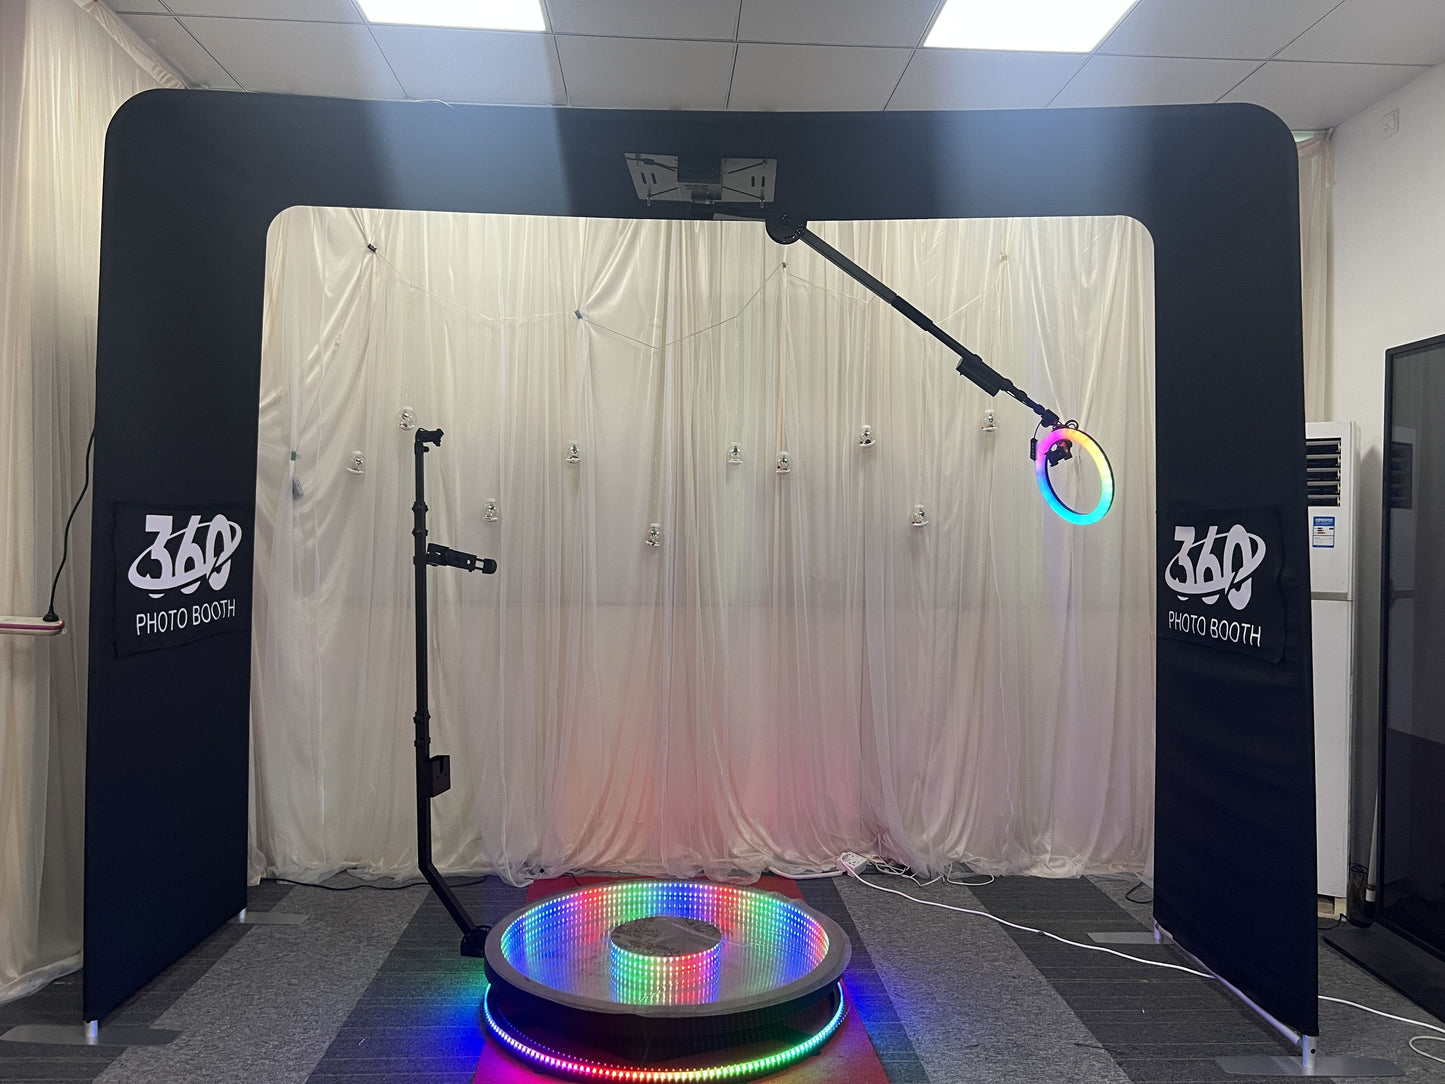 Eucens Portable Overhead 360 Photo Booth for Wedding Party Events Sky 360 Selfie Booth Top Automatic Spin with remote